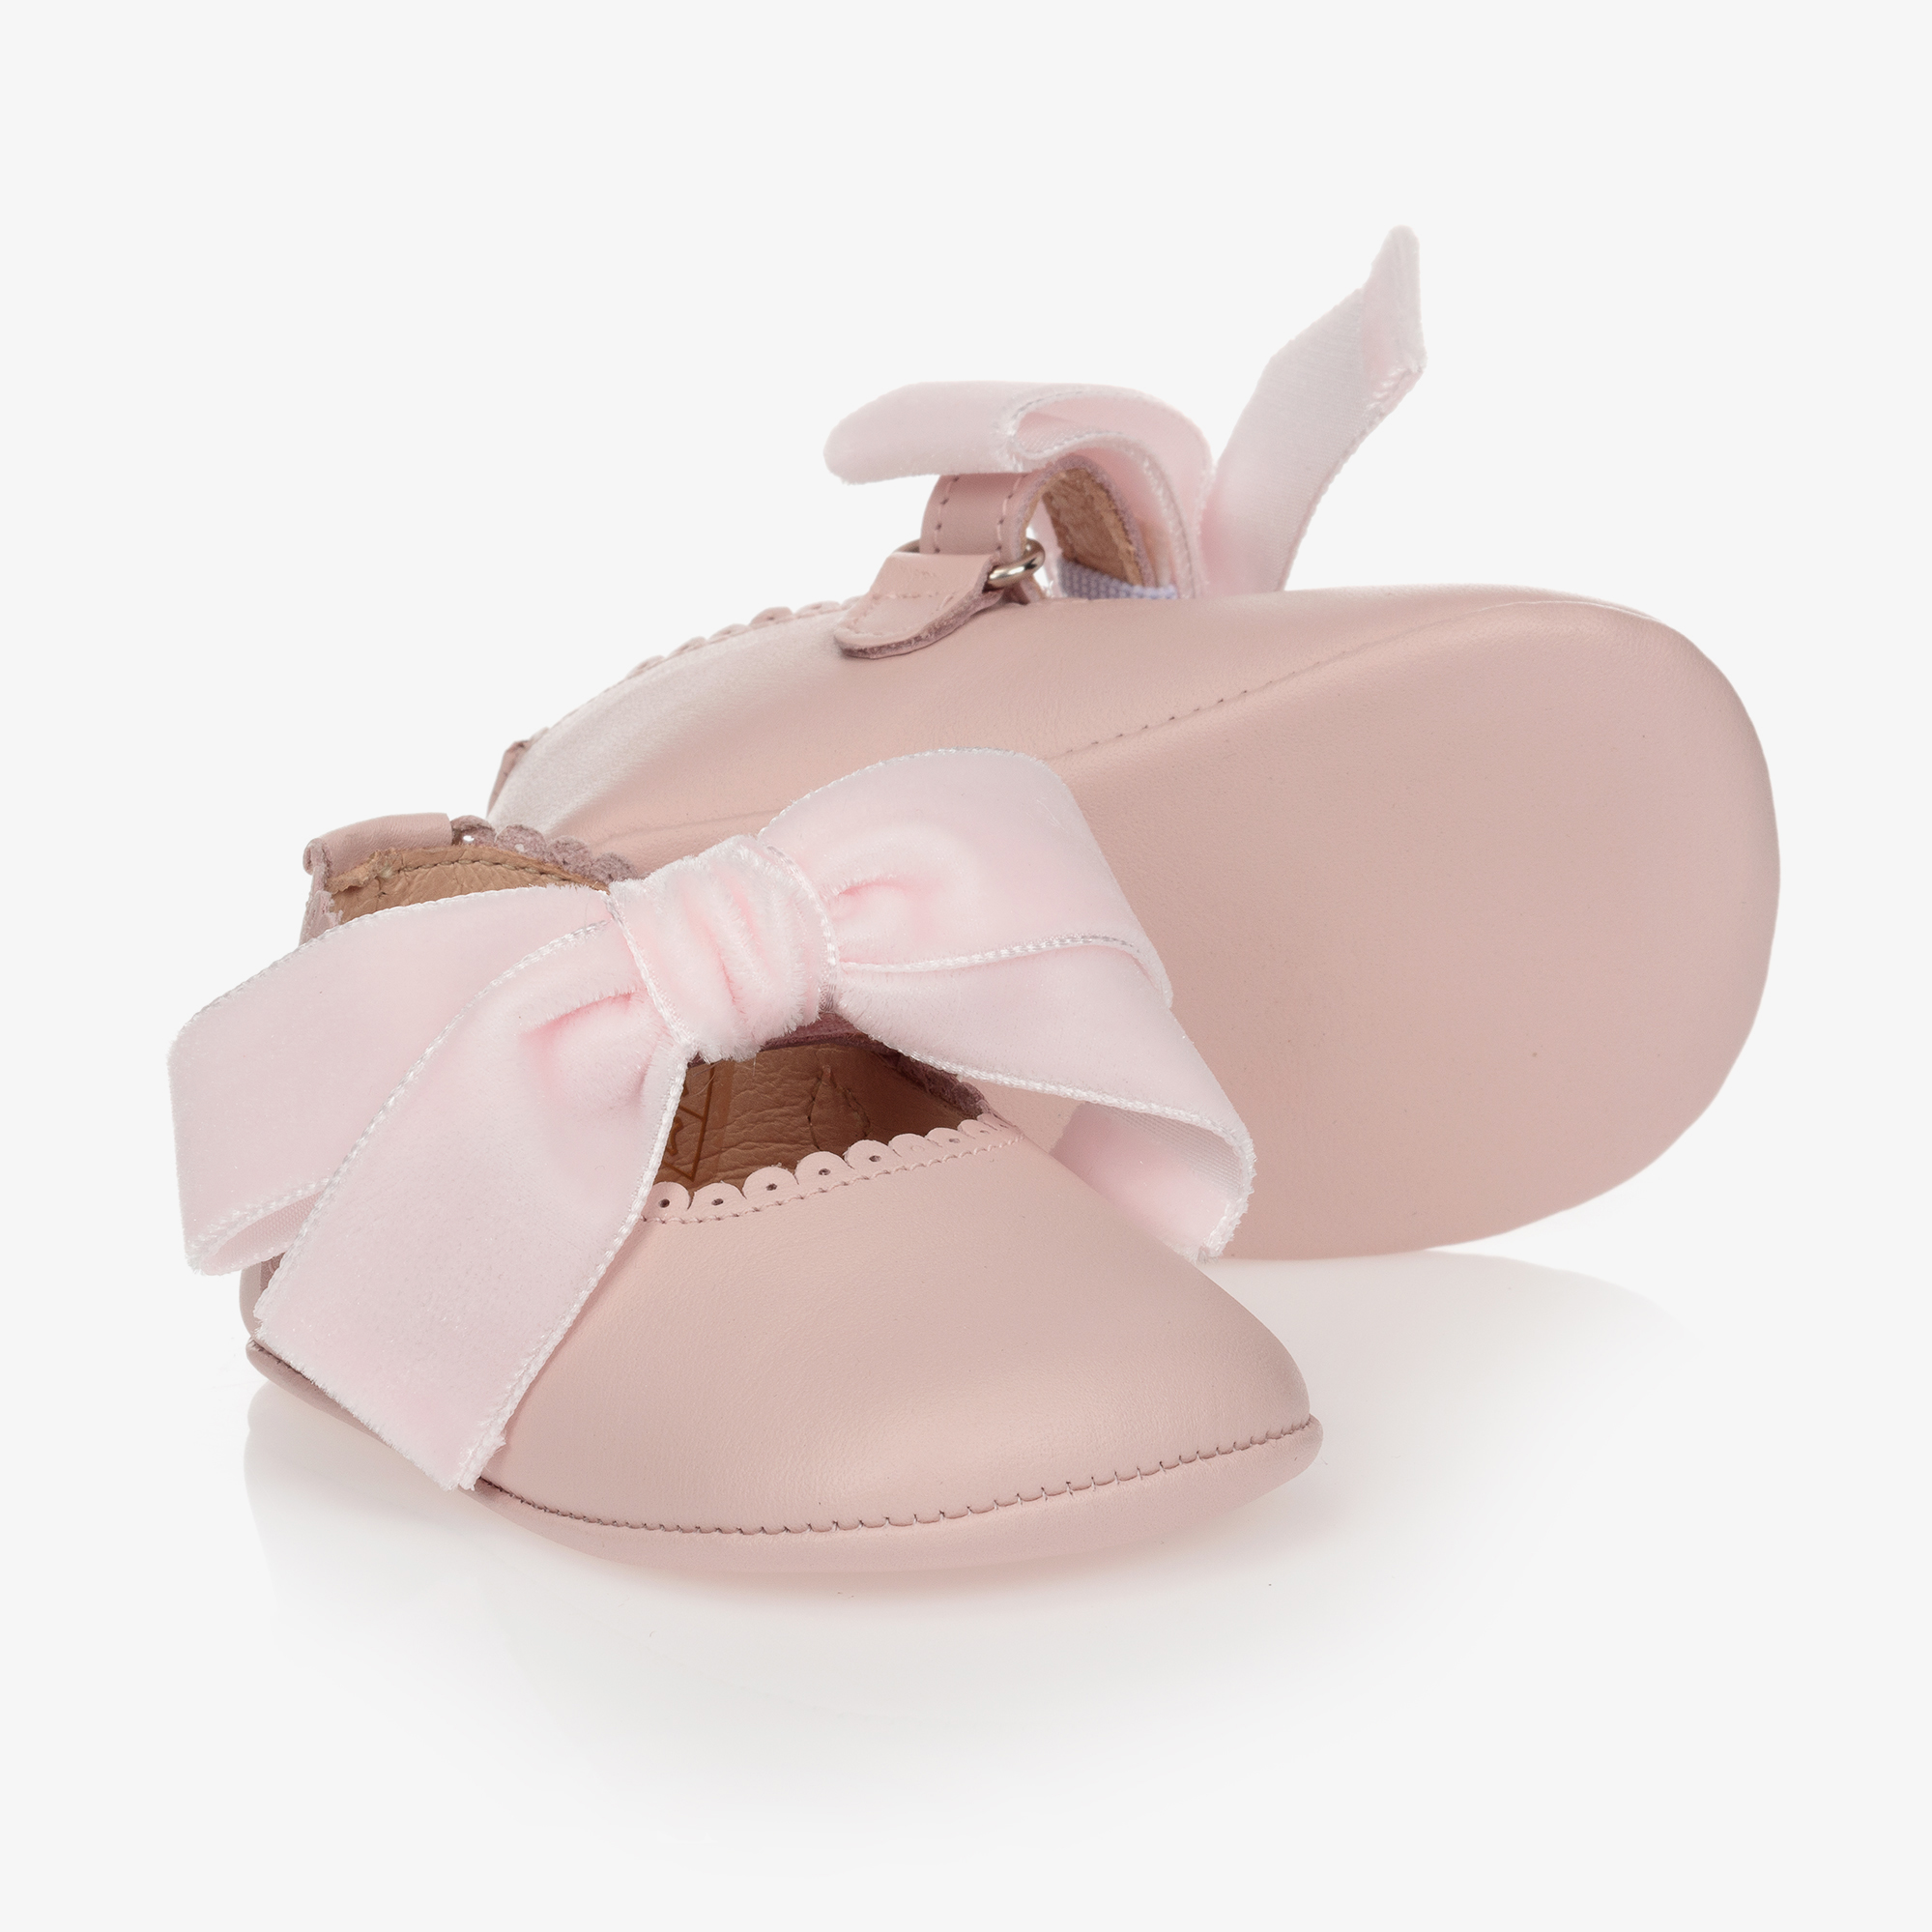 Tip Toey Joey - Pink Leather Baby Boots | Childrensalon